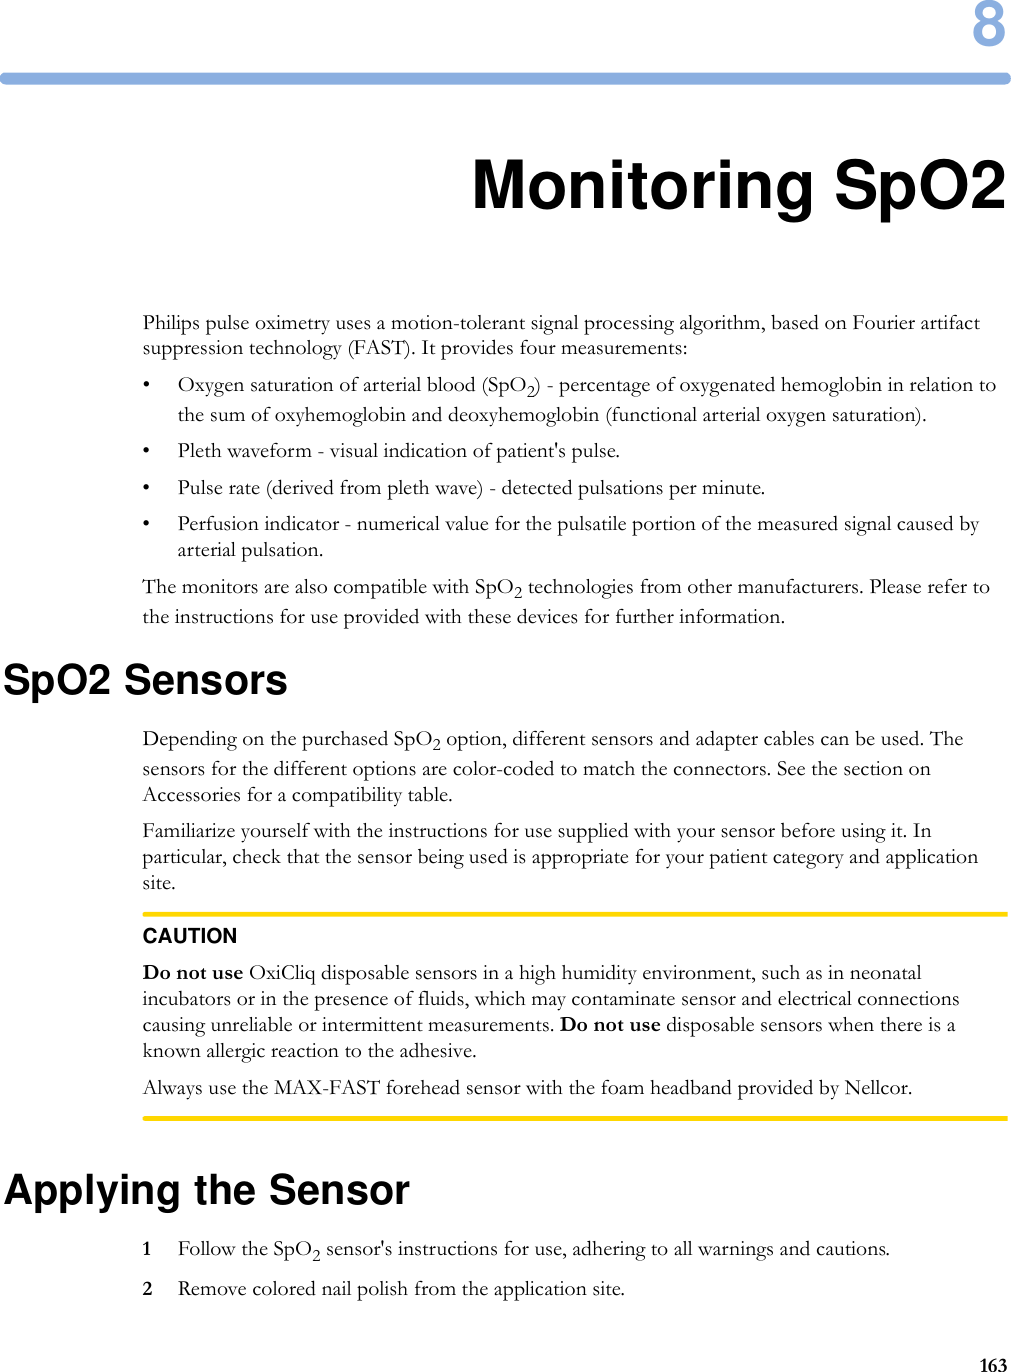 81638Monitoring SpO2Philips pulse oximetry uses a motion-tolerant signal processing algorithm, based on Fourier artifact suppression technology (FAST). It provides four measurements:• Oxygen saturation of arterial blood (SpO2) - percentage of oxygenated hemoglobin in relation to the sum of oxyhemoglobin and deoxyhemoglobin (functional arterial oxygen saturation).• Pleth waveform - visual indication of patient&apos;s pulse.• Pulse rate (derived from pleth wave) - detected pulsations per minute.• Perfusion indicator - numerical value for the pulsatile portion of the measured signal caused by arterial pulsation.The monitors are also compatible with SpO2 technologies from other manufacturers. Please refer to the instructions for use provided with these devices for further information.SpO2 SensorsDepending on the purchased SpO2 option, different sensors and adapter cables can be used. The sensors for the different options are color-coded to match the connectors. See the section on Accessories for a compatibility table.Familiarize yourself with the instructions for use supplied with your sensor before using it. In particular, check that the sensor being used is appropriate for your patient category and application site.CAUTIONDo not use OxiCliq disposable sensors in a high humidity environment, such as in neonatal incubators or in the presence of fluids, which may contaminate sensor and electrical connections causing unreliable or intermittent measurements. Do not use disposable sensors when there is a known allergic reaction to the adhesive.Always use the MAX-FAST forehead sensor with the foam headband provided by Nellcor.Applying the Sensor1Follow the SpO2 sensor&apos;s instructions for use, adhering to all warnings and cautions.2Remove colored nail polish from the application site.